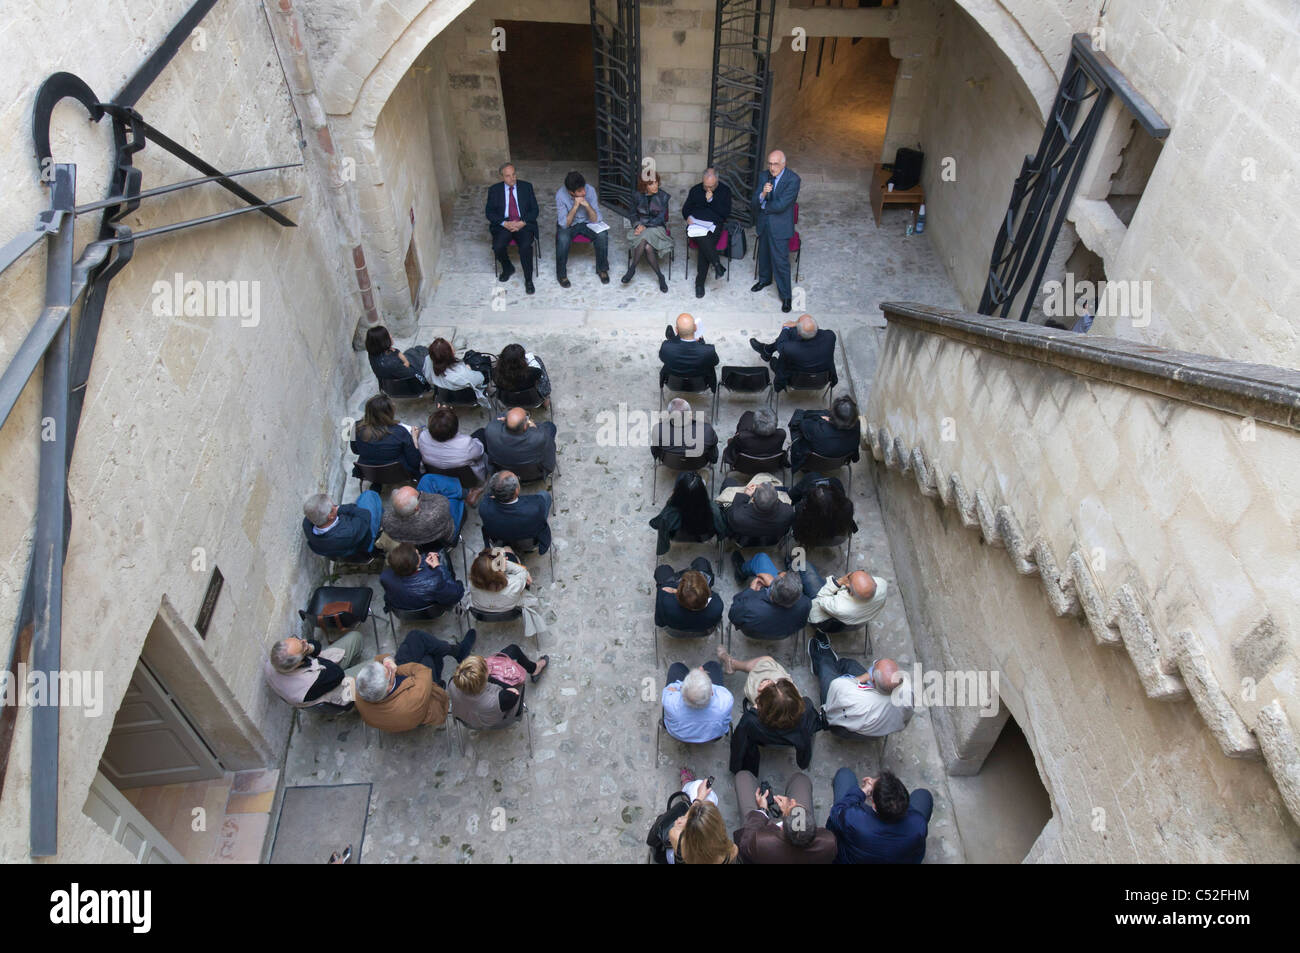 MUSMA art gallery housed in caves of the UNESCO site, the Sasso Caveoso of Matera. A symposium for art experts Stock Photo